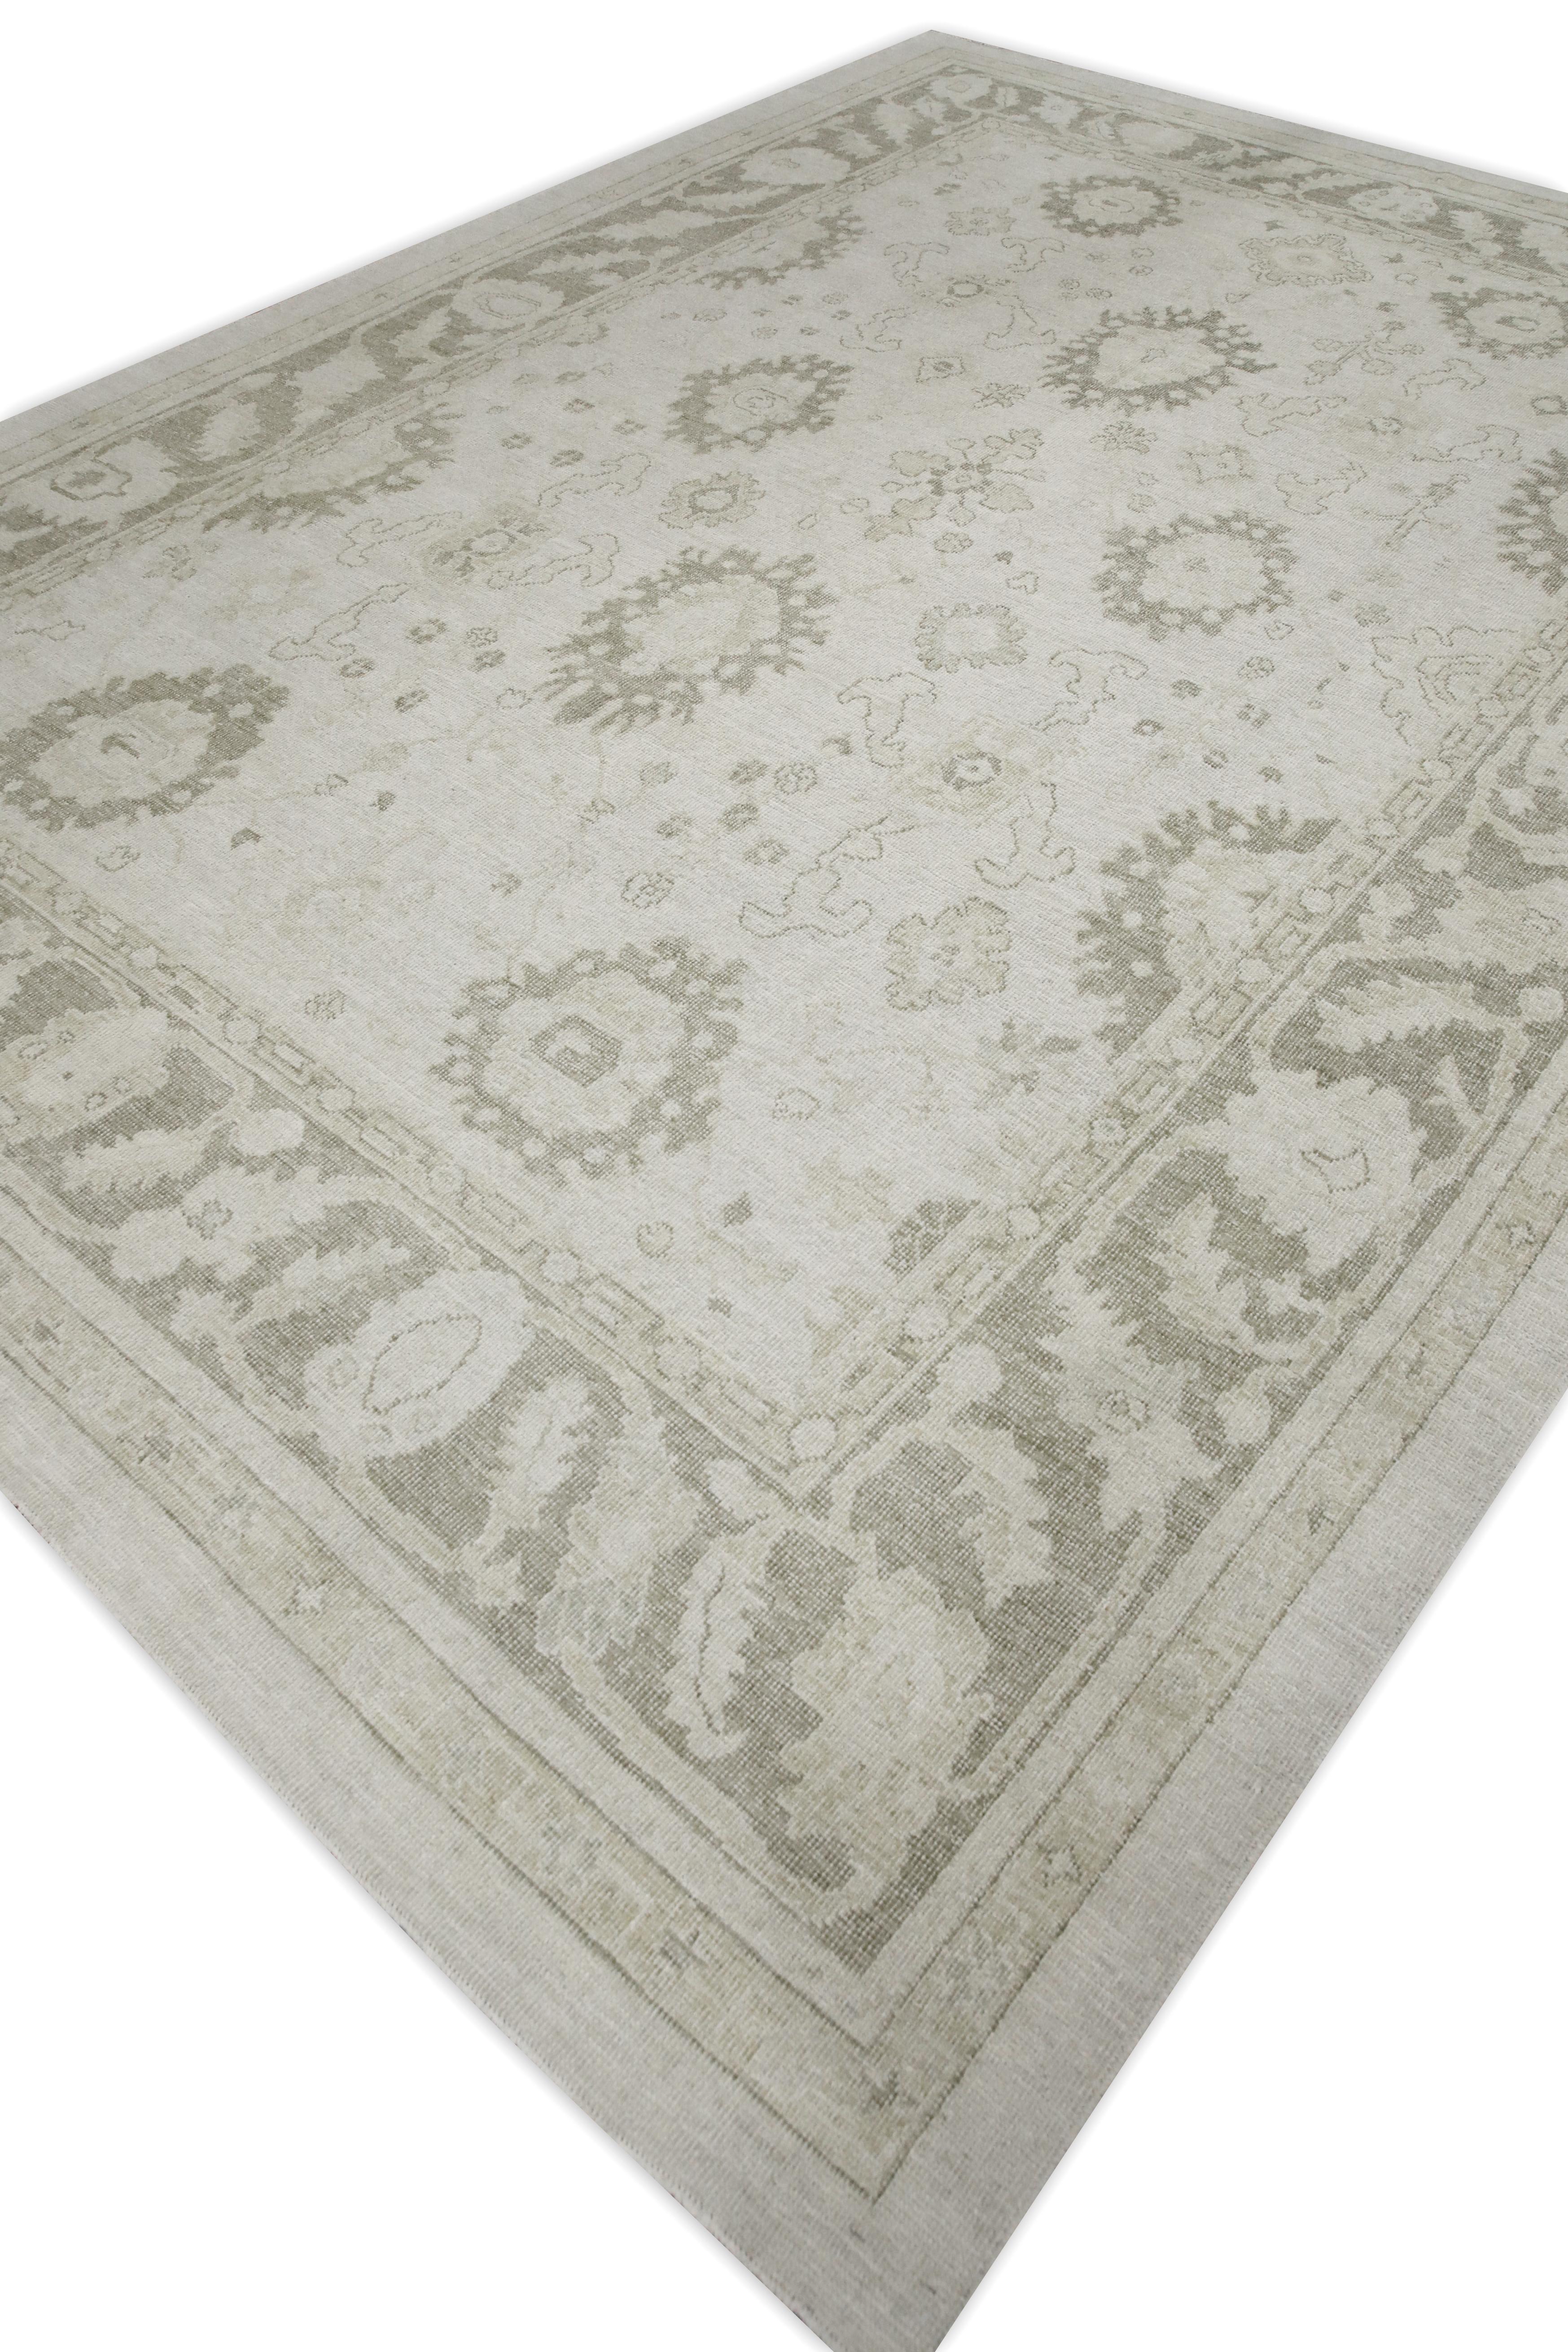 Contemporary White & Green Floral Design Handwoven Wool Turkish Oushak Rug 10' X 13'4